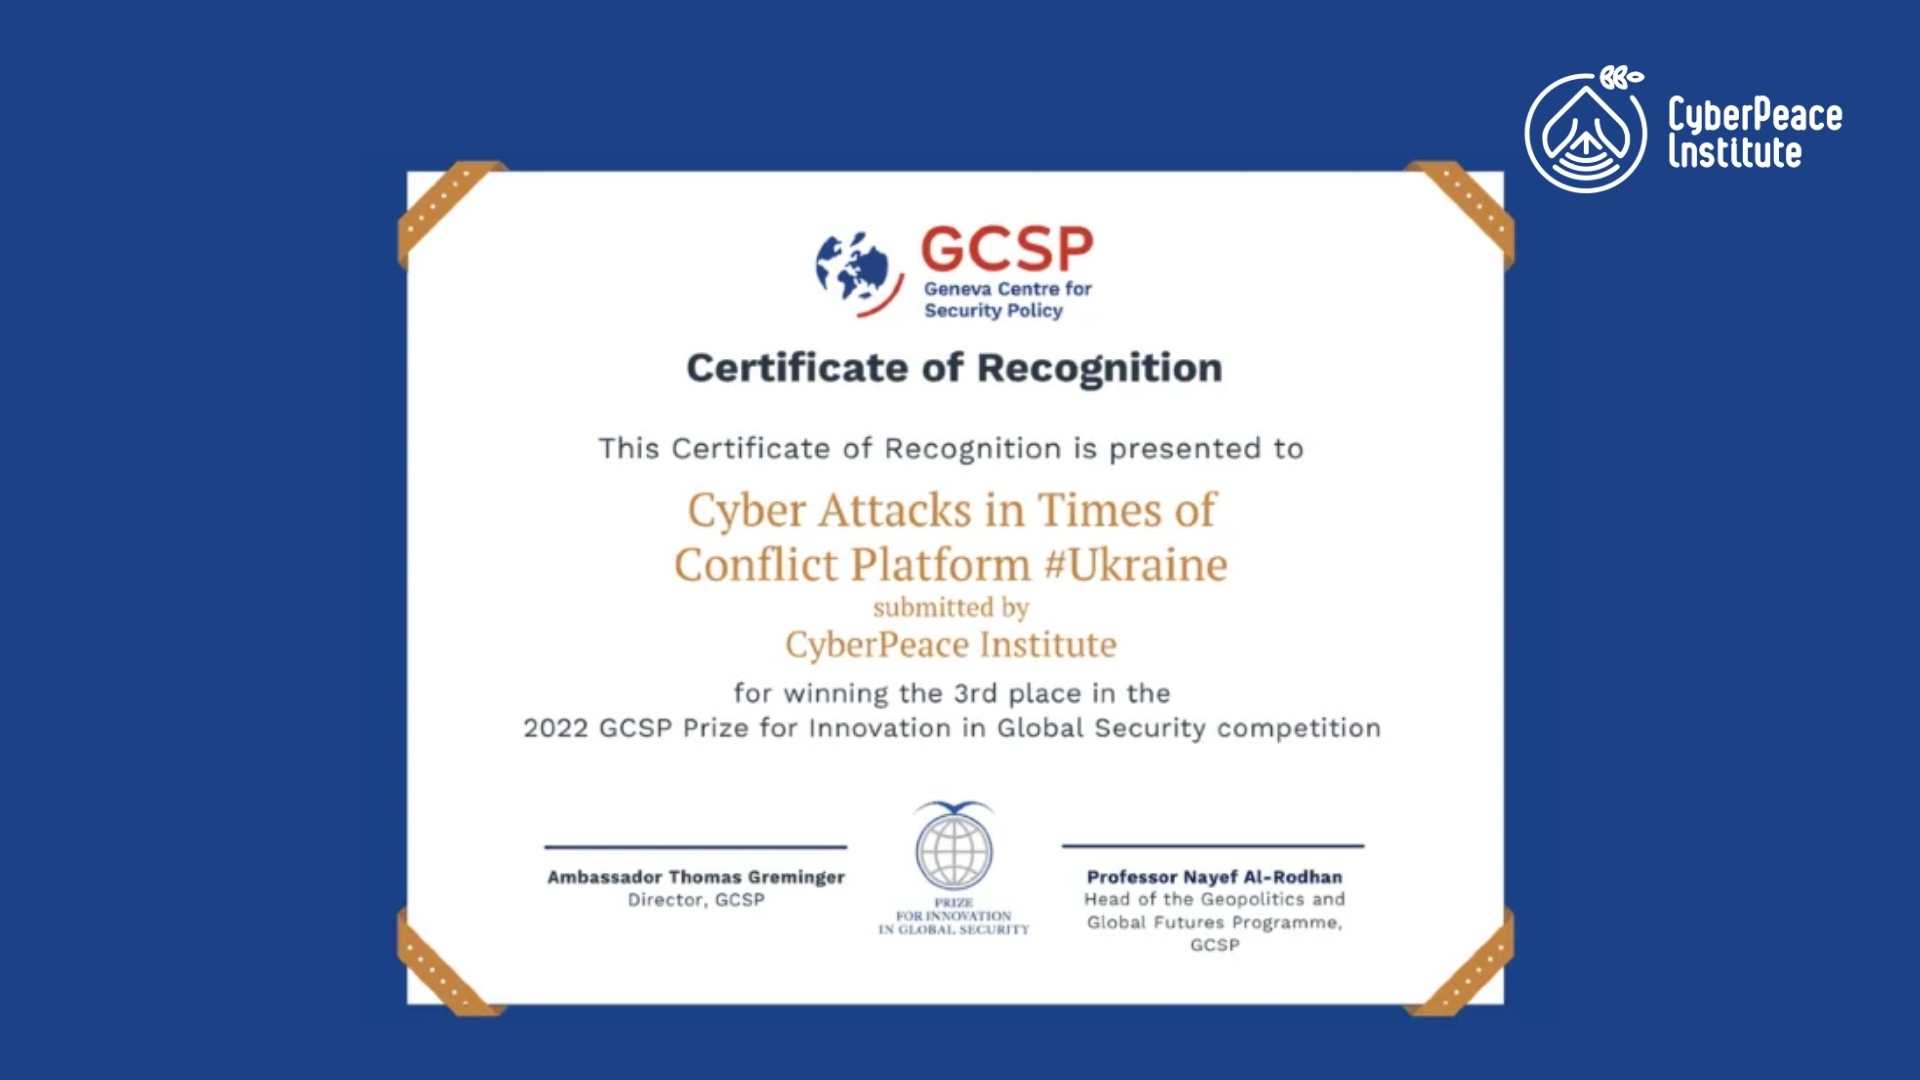 Prize for Innovation in Global Security (GCSP)